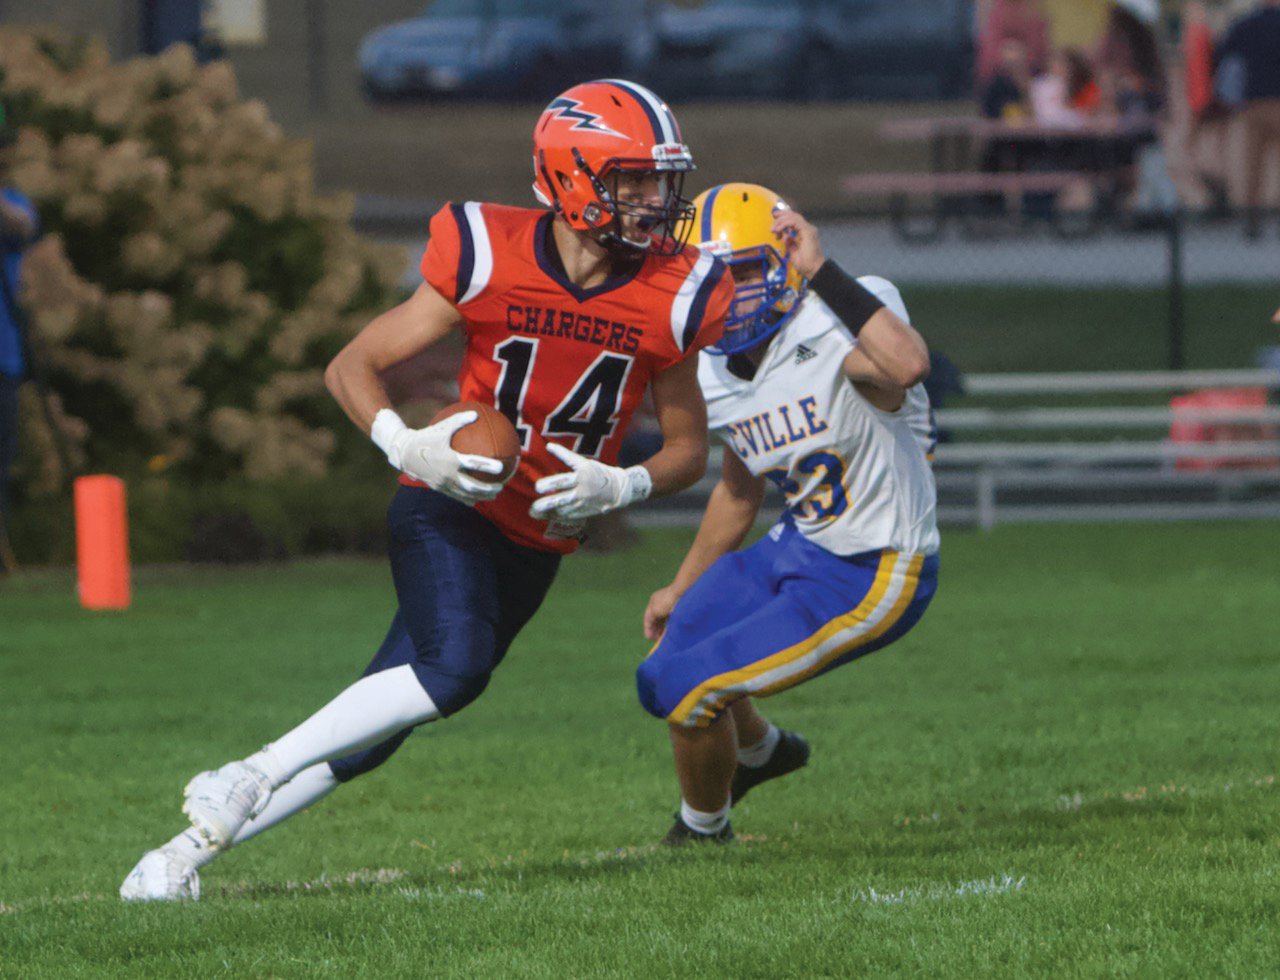 North Montgomery’s Kolton Scrimager makes a man miss